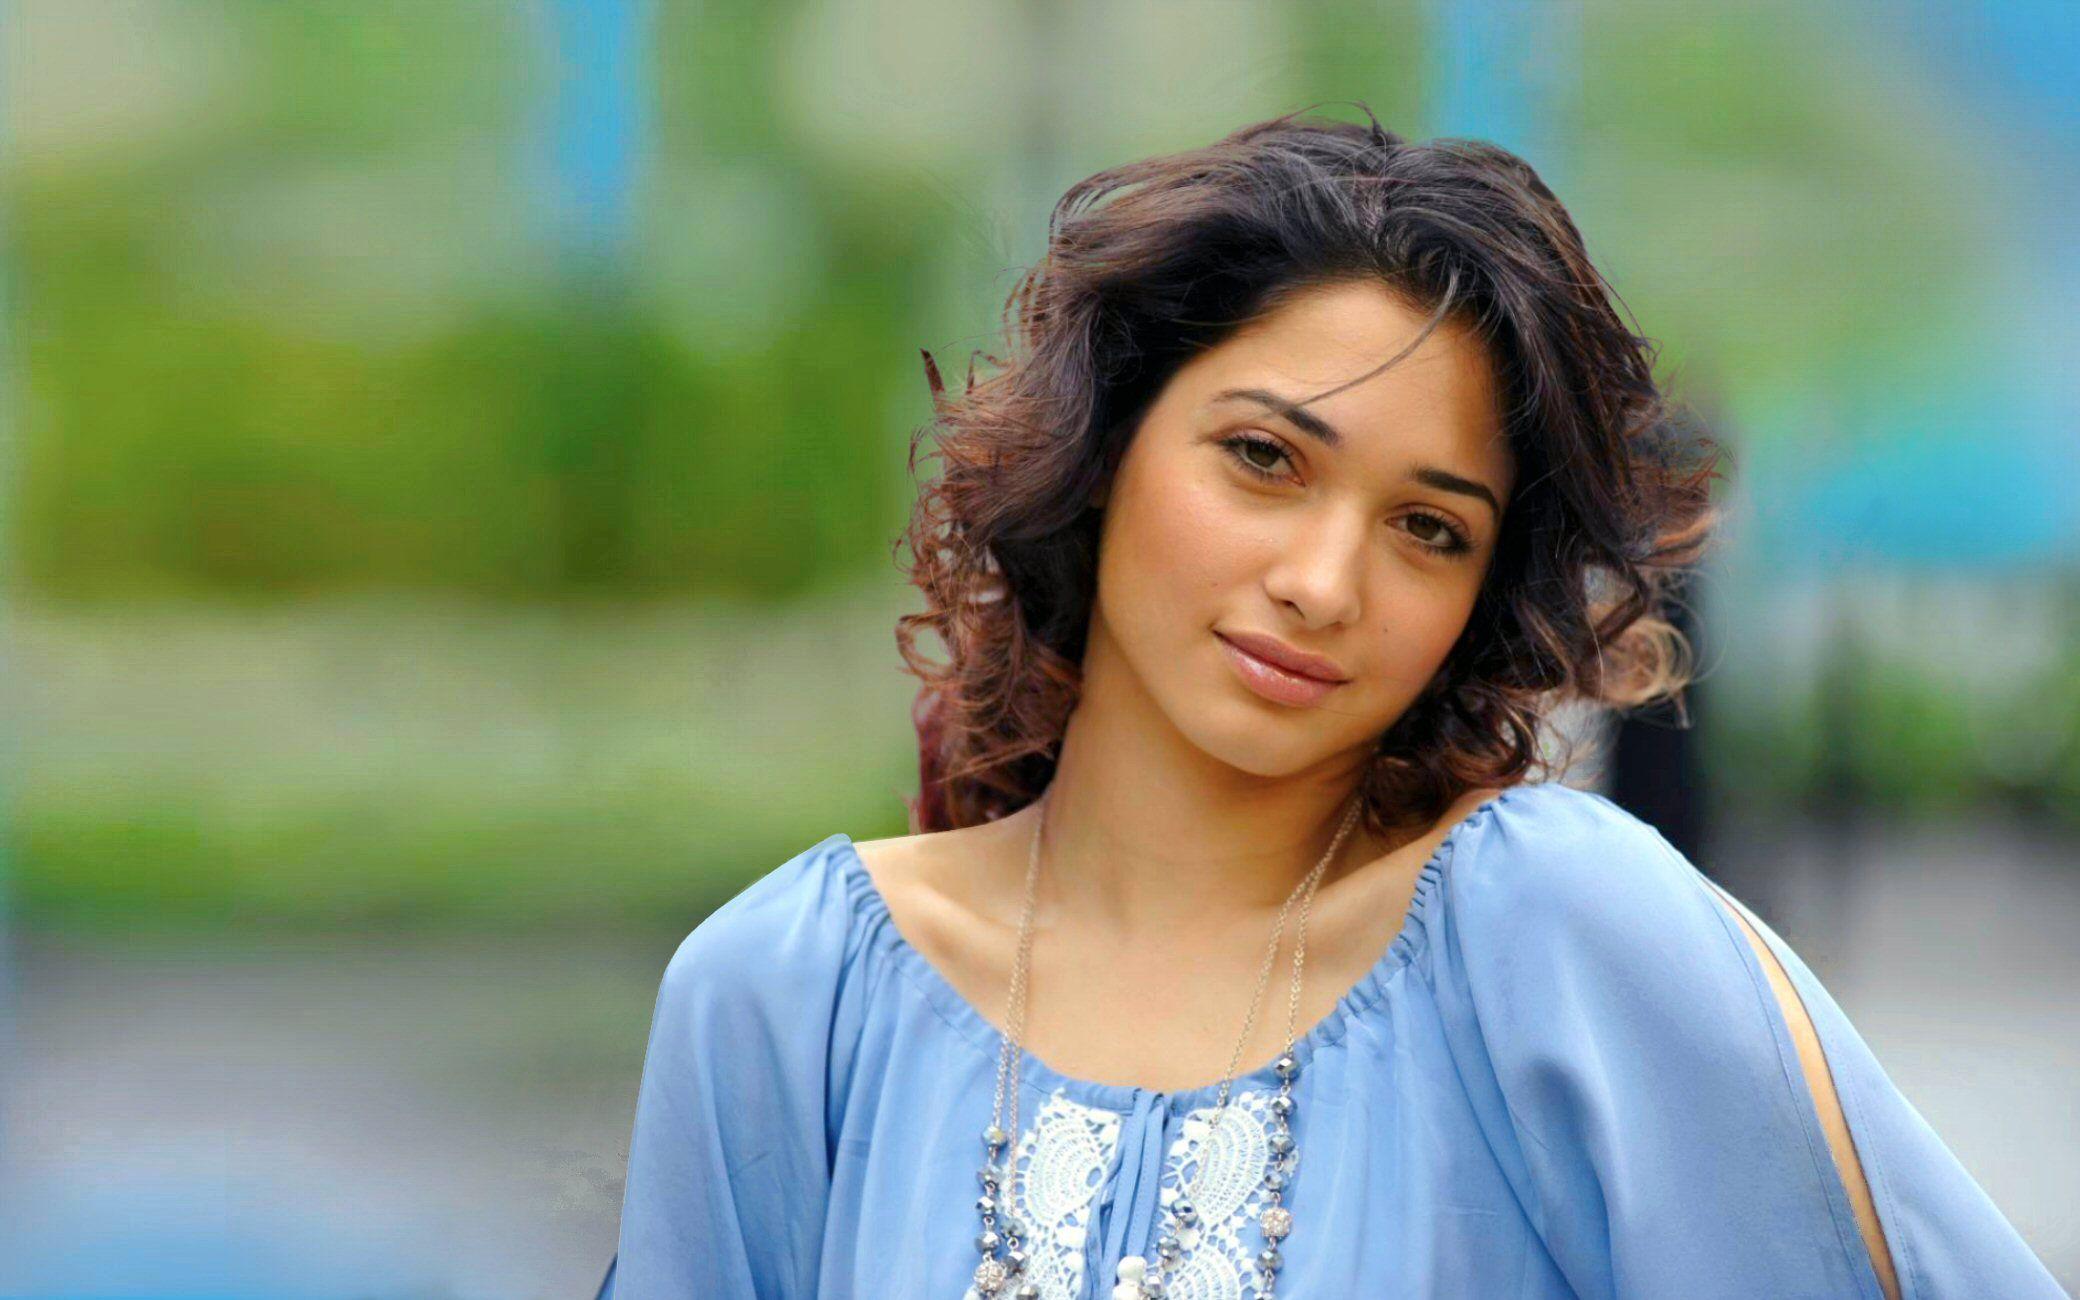 Tamanna Bhatia Wallpapers, Pictures, Image.